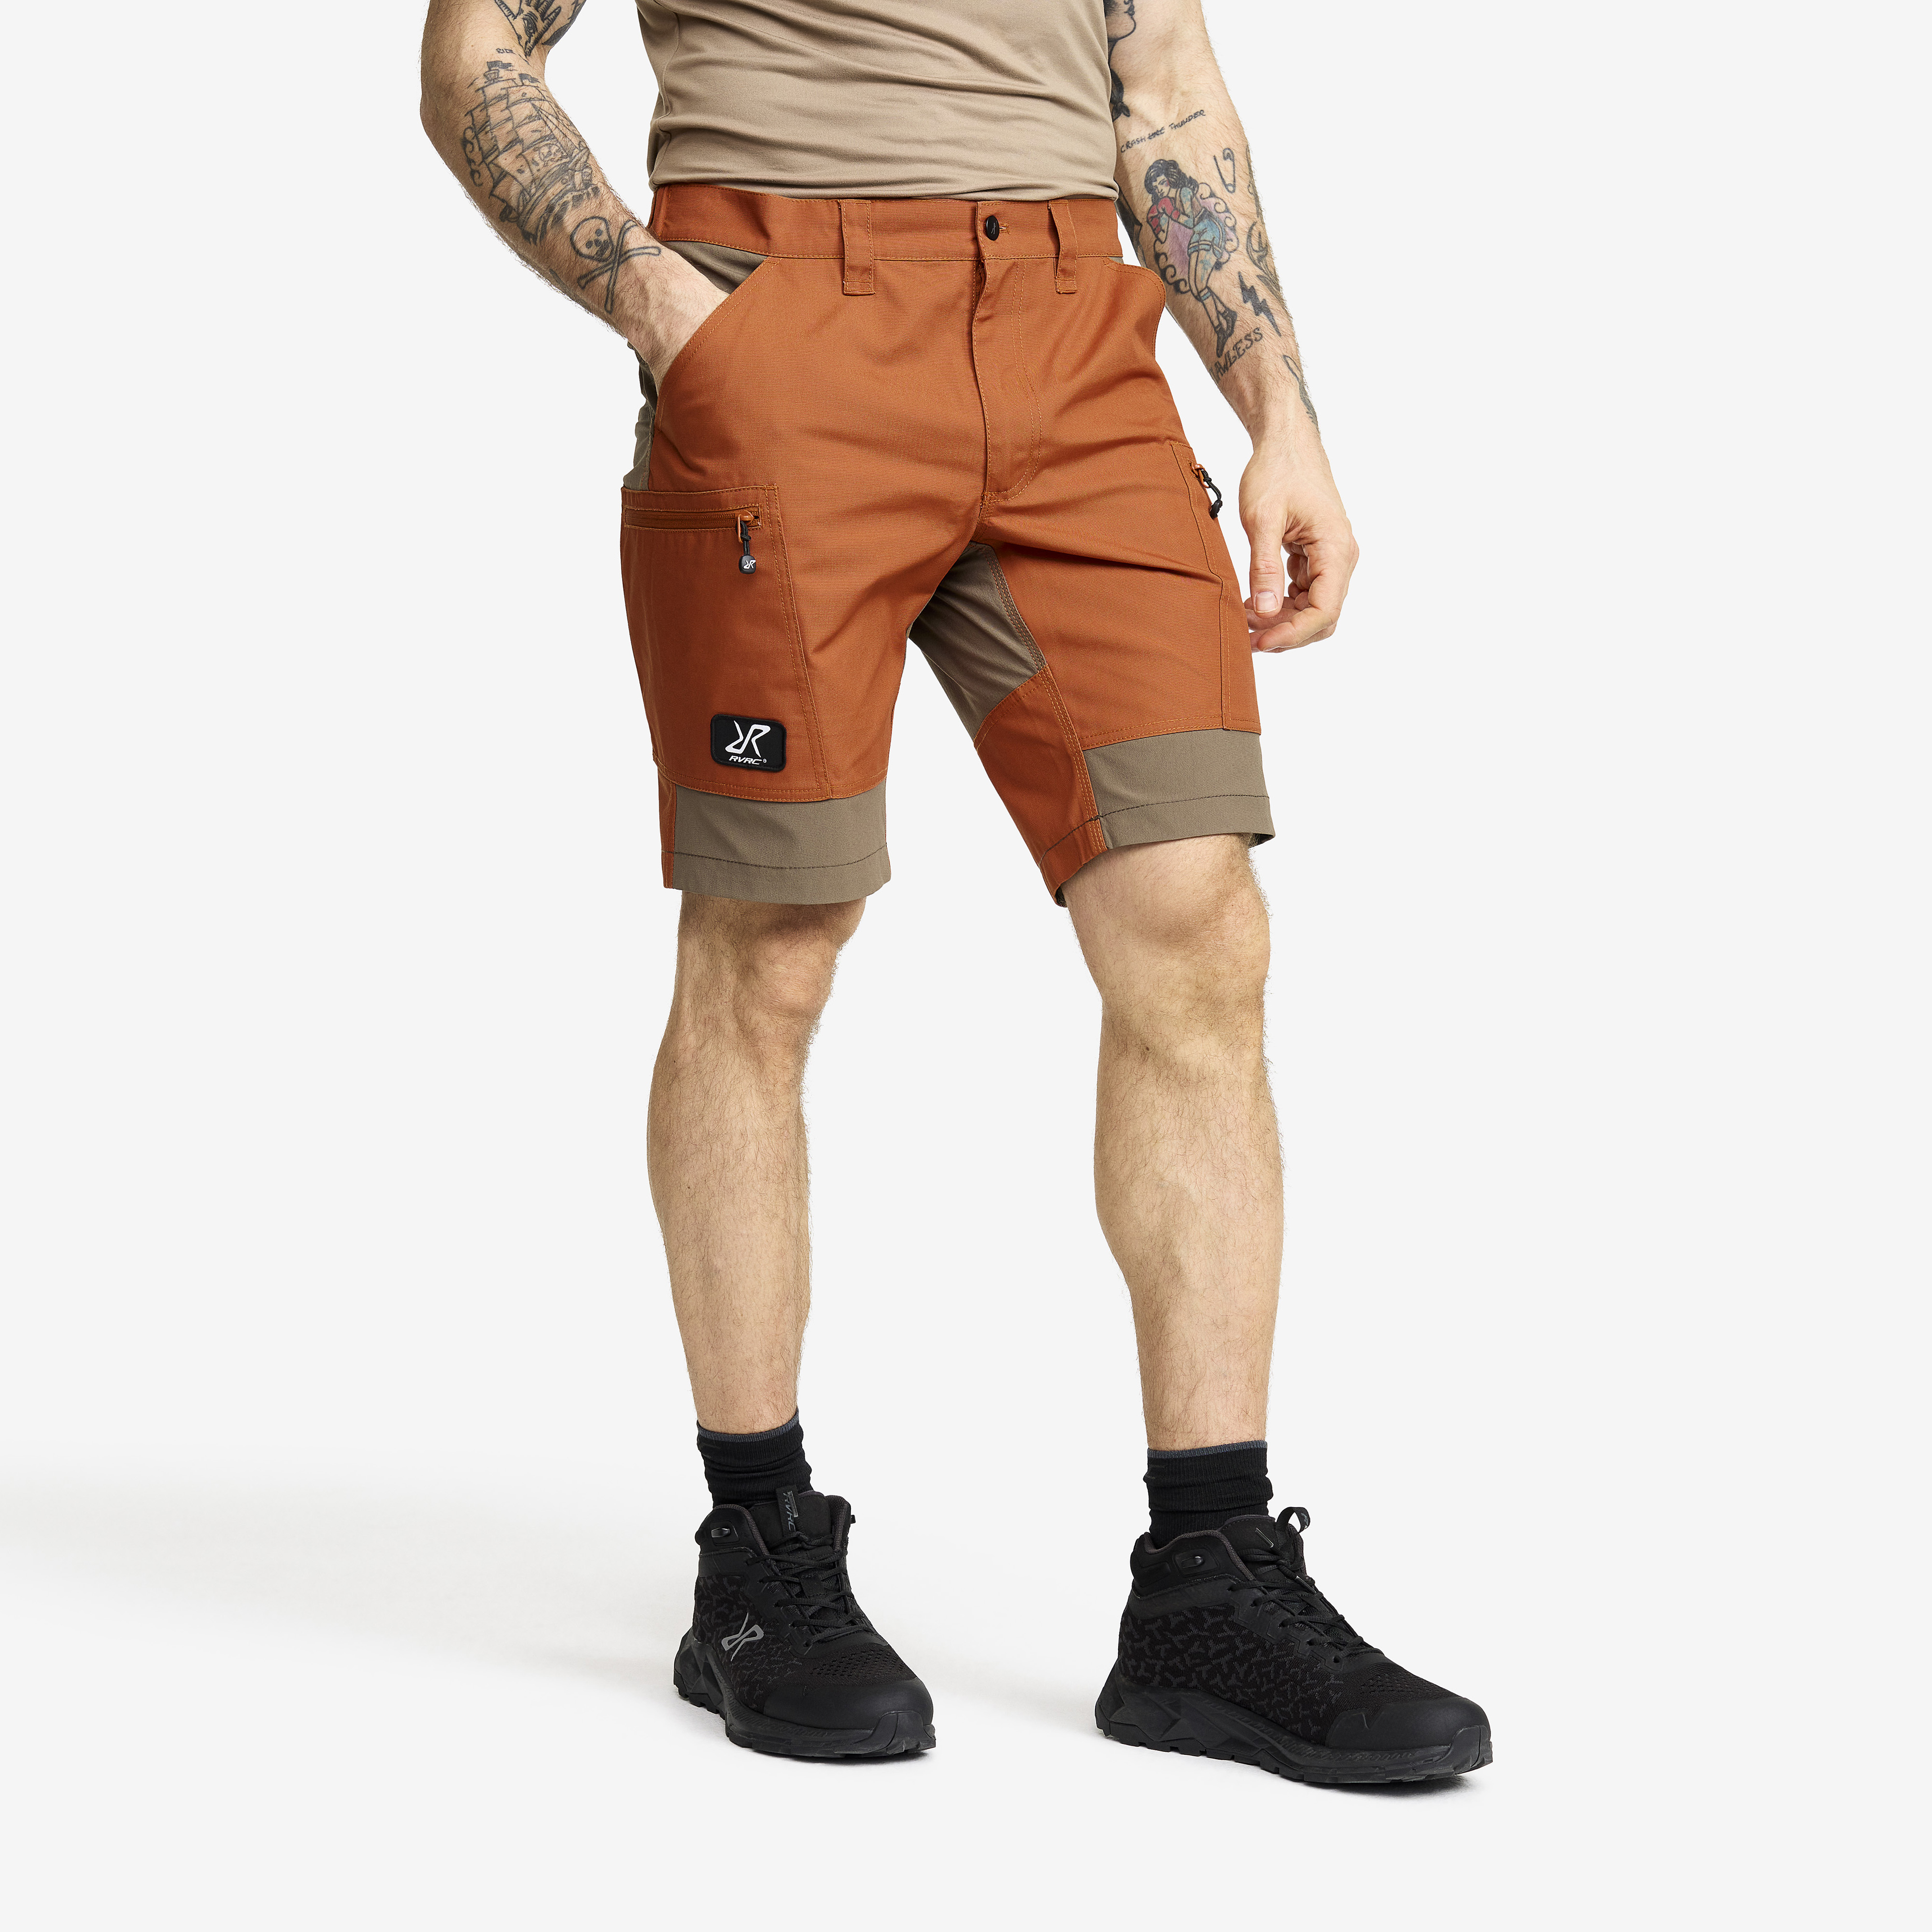 Nordwand Shorts Teracotta Brown/chocolate Chip Homme